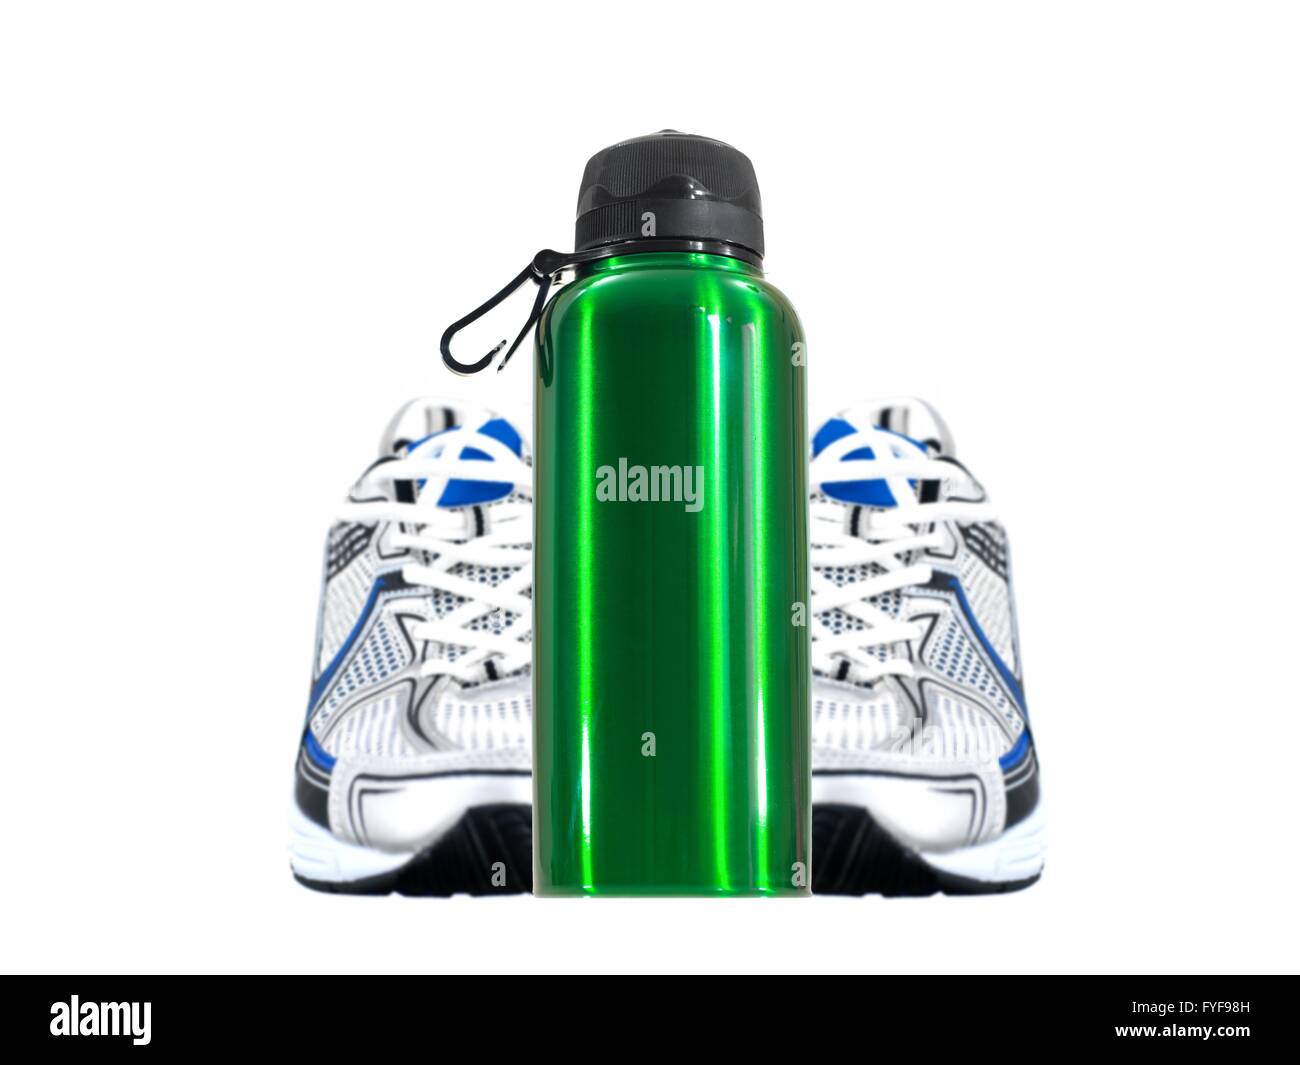 https://c8.alamy.com/comp/FYF98H/a-sports-drink-bottle-isolated-against-a-white-background-FYF98H.jpg